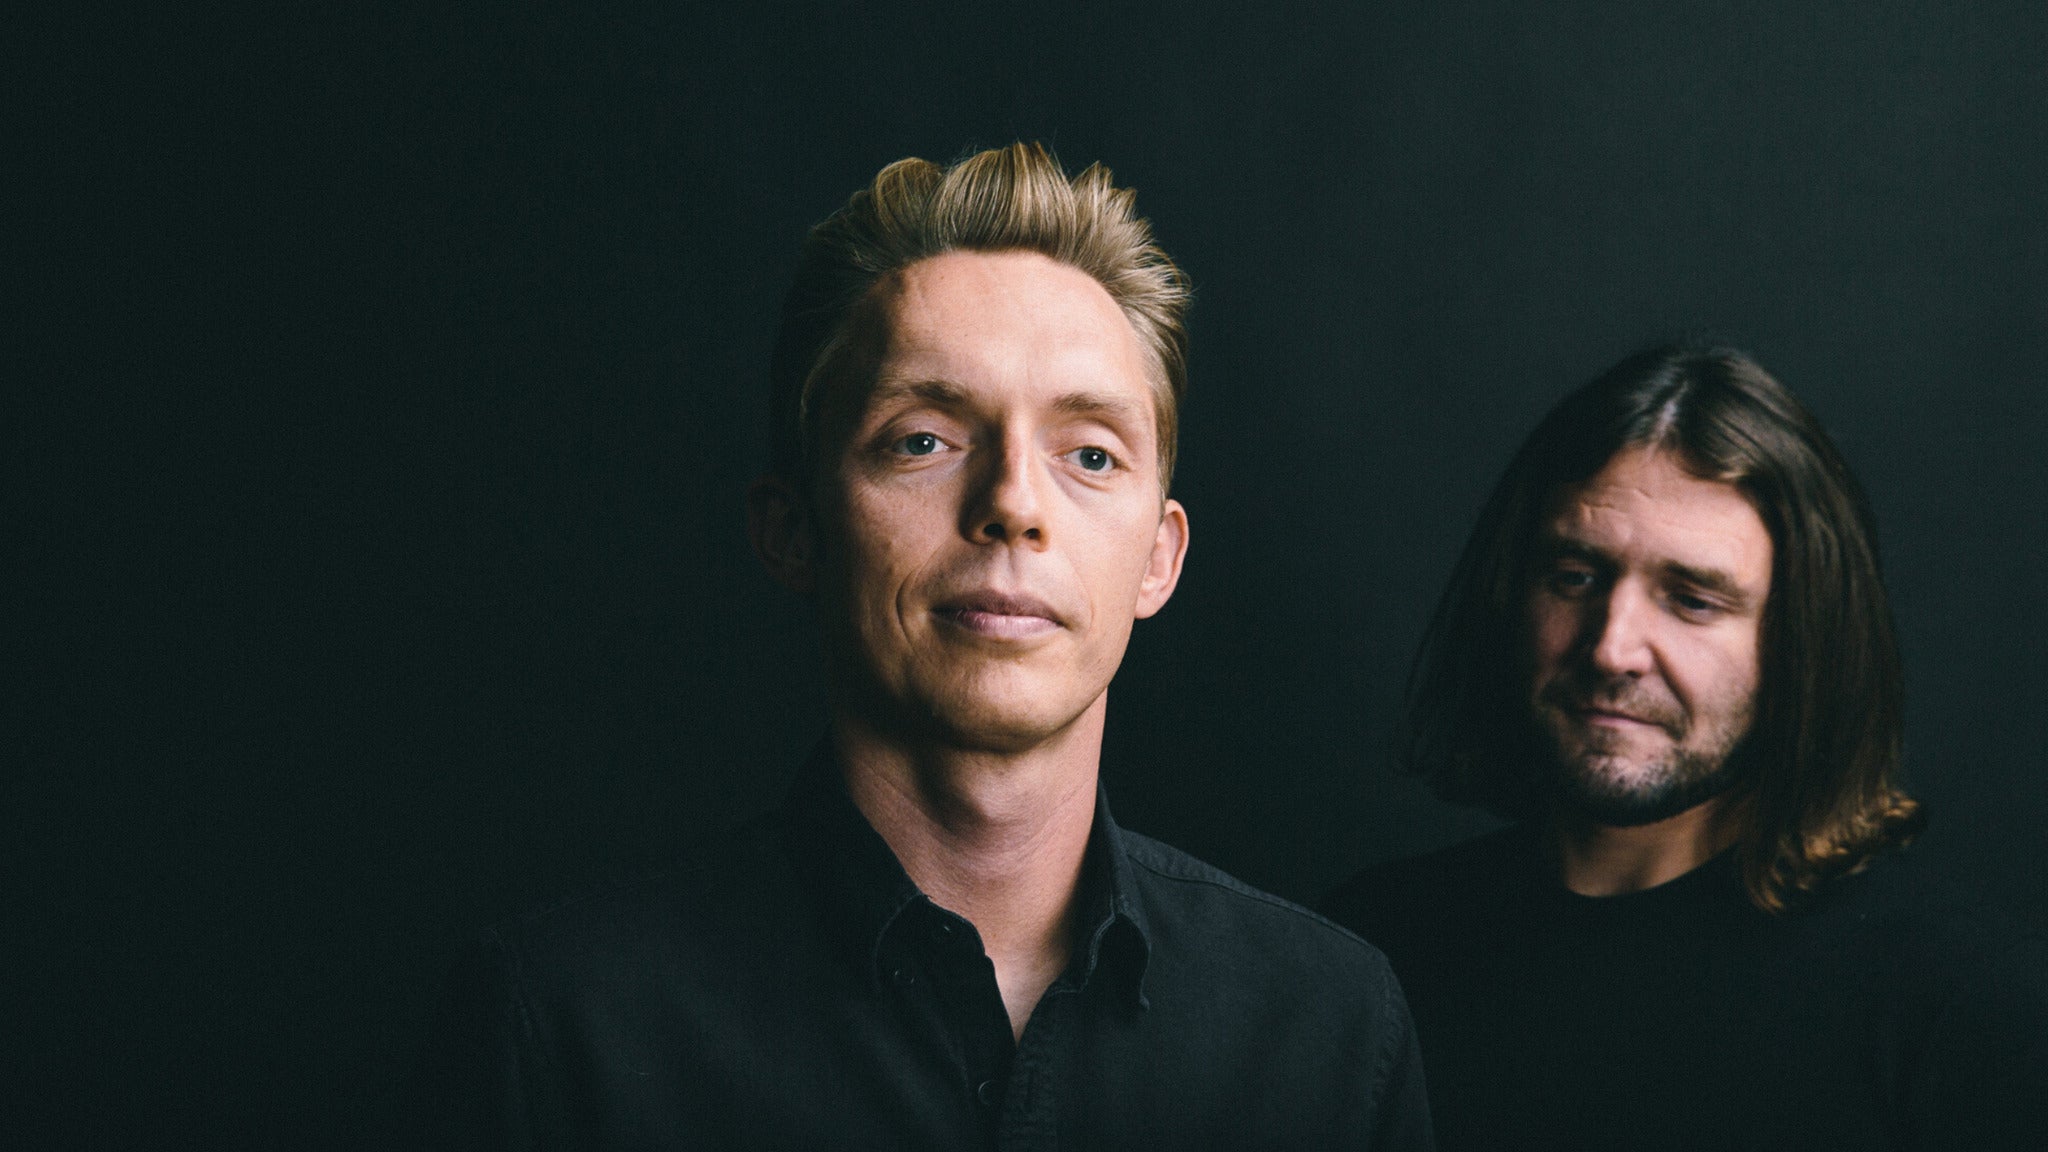 The Minimalists - SHOW MOVED TO DANFORTH MUSIC HALL in Toronto promo photo for VIP Package presale offer code